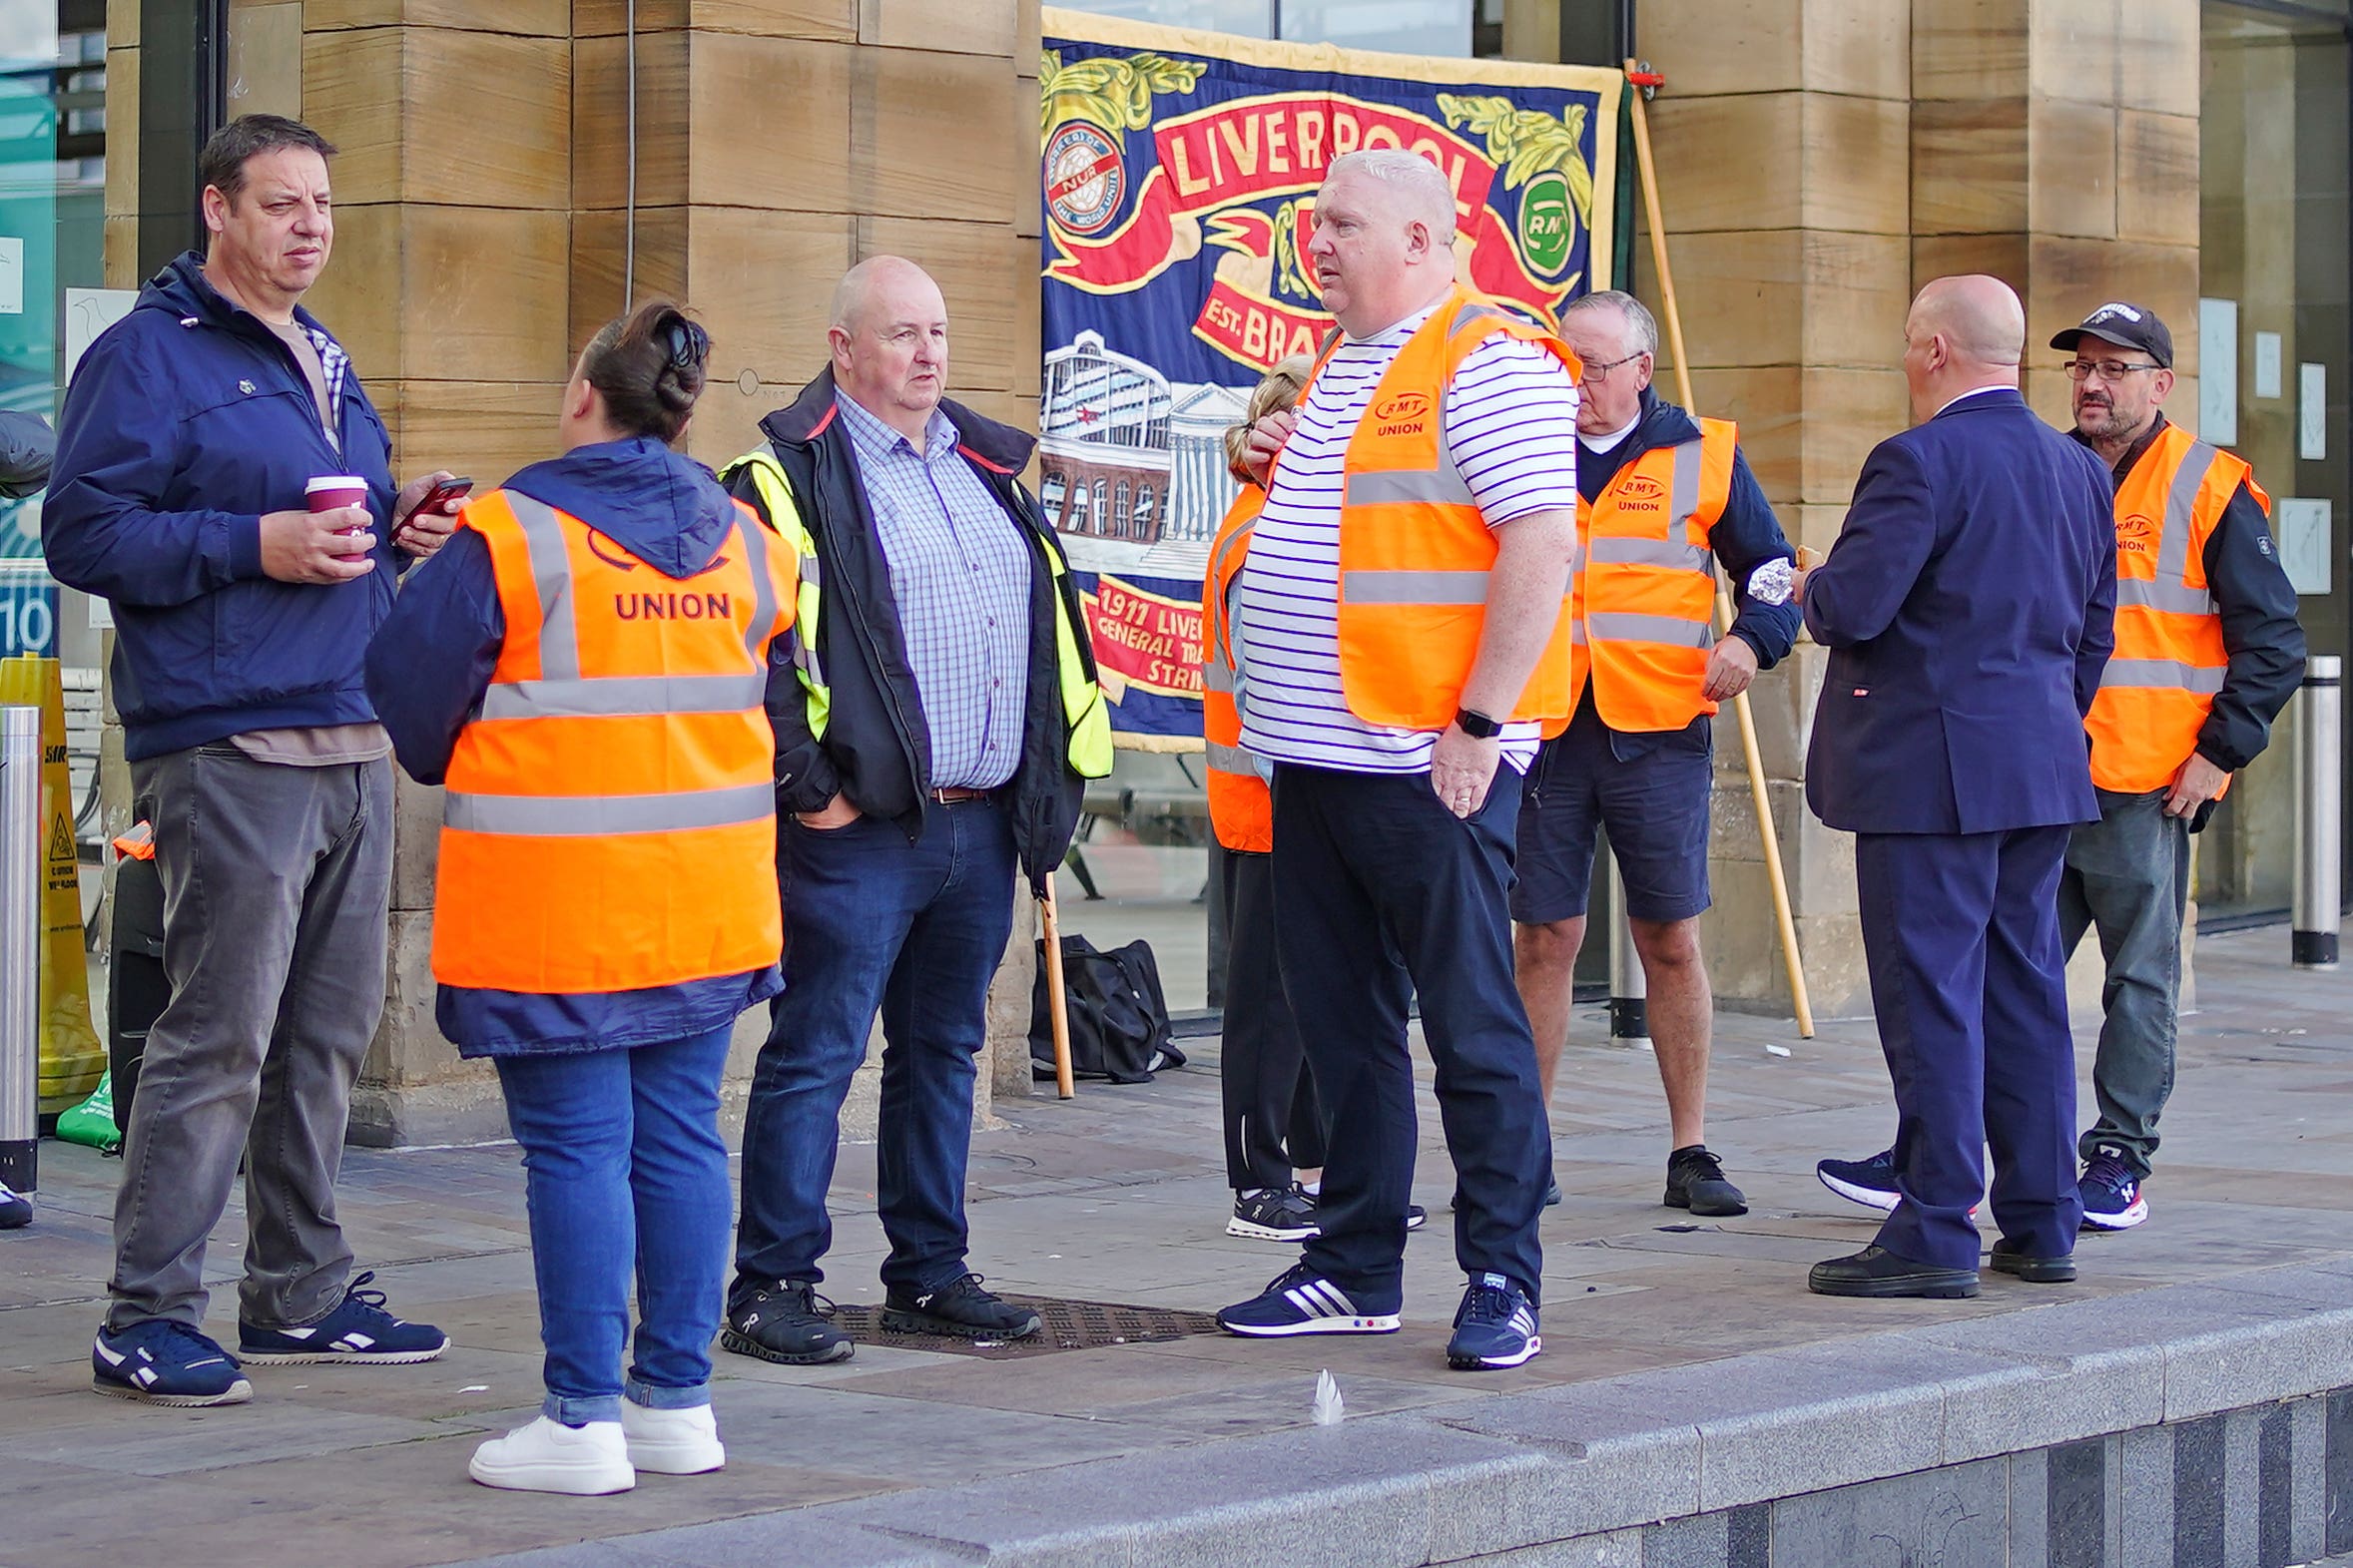 RMT mmbers on a picket line outside Liverpool Lime Street station (Peter Byrne/PA)